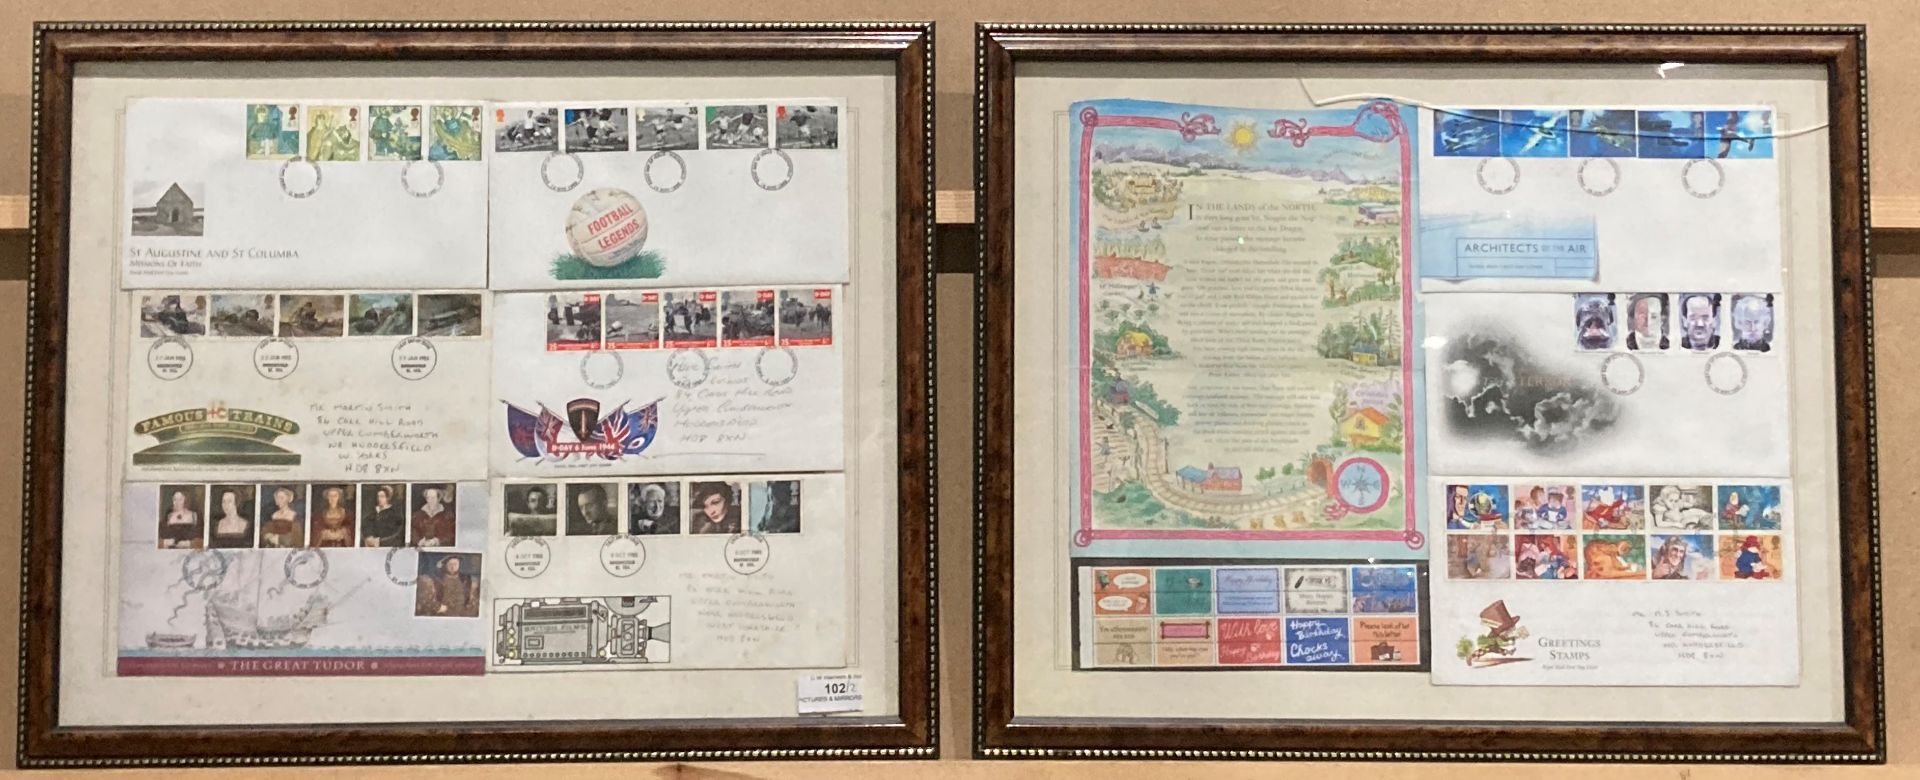 Two framed Royal Mail first day cover Montages - featuring Football Legends, D-Day,